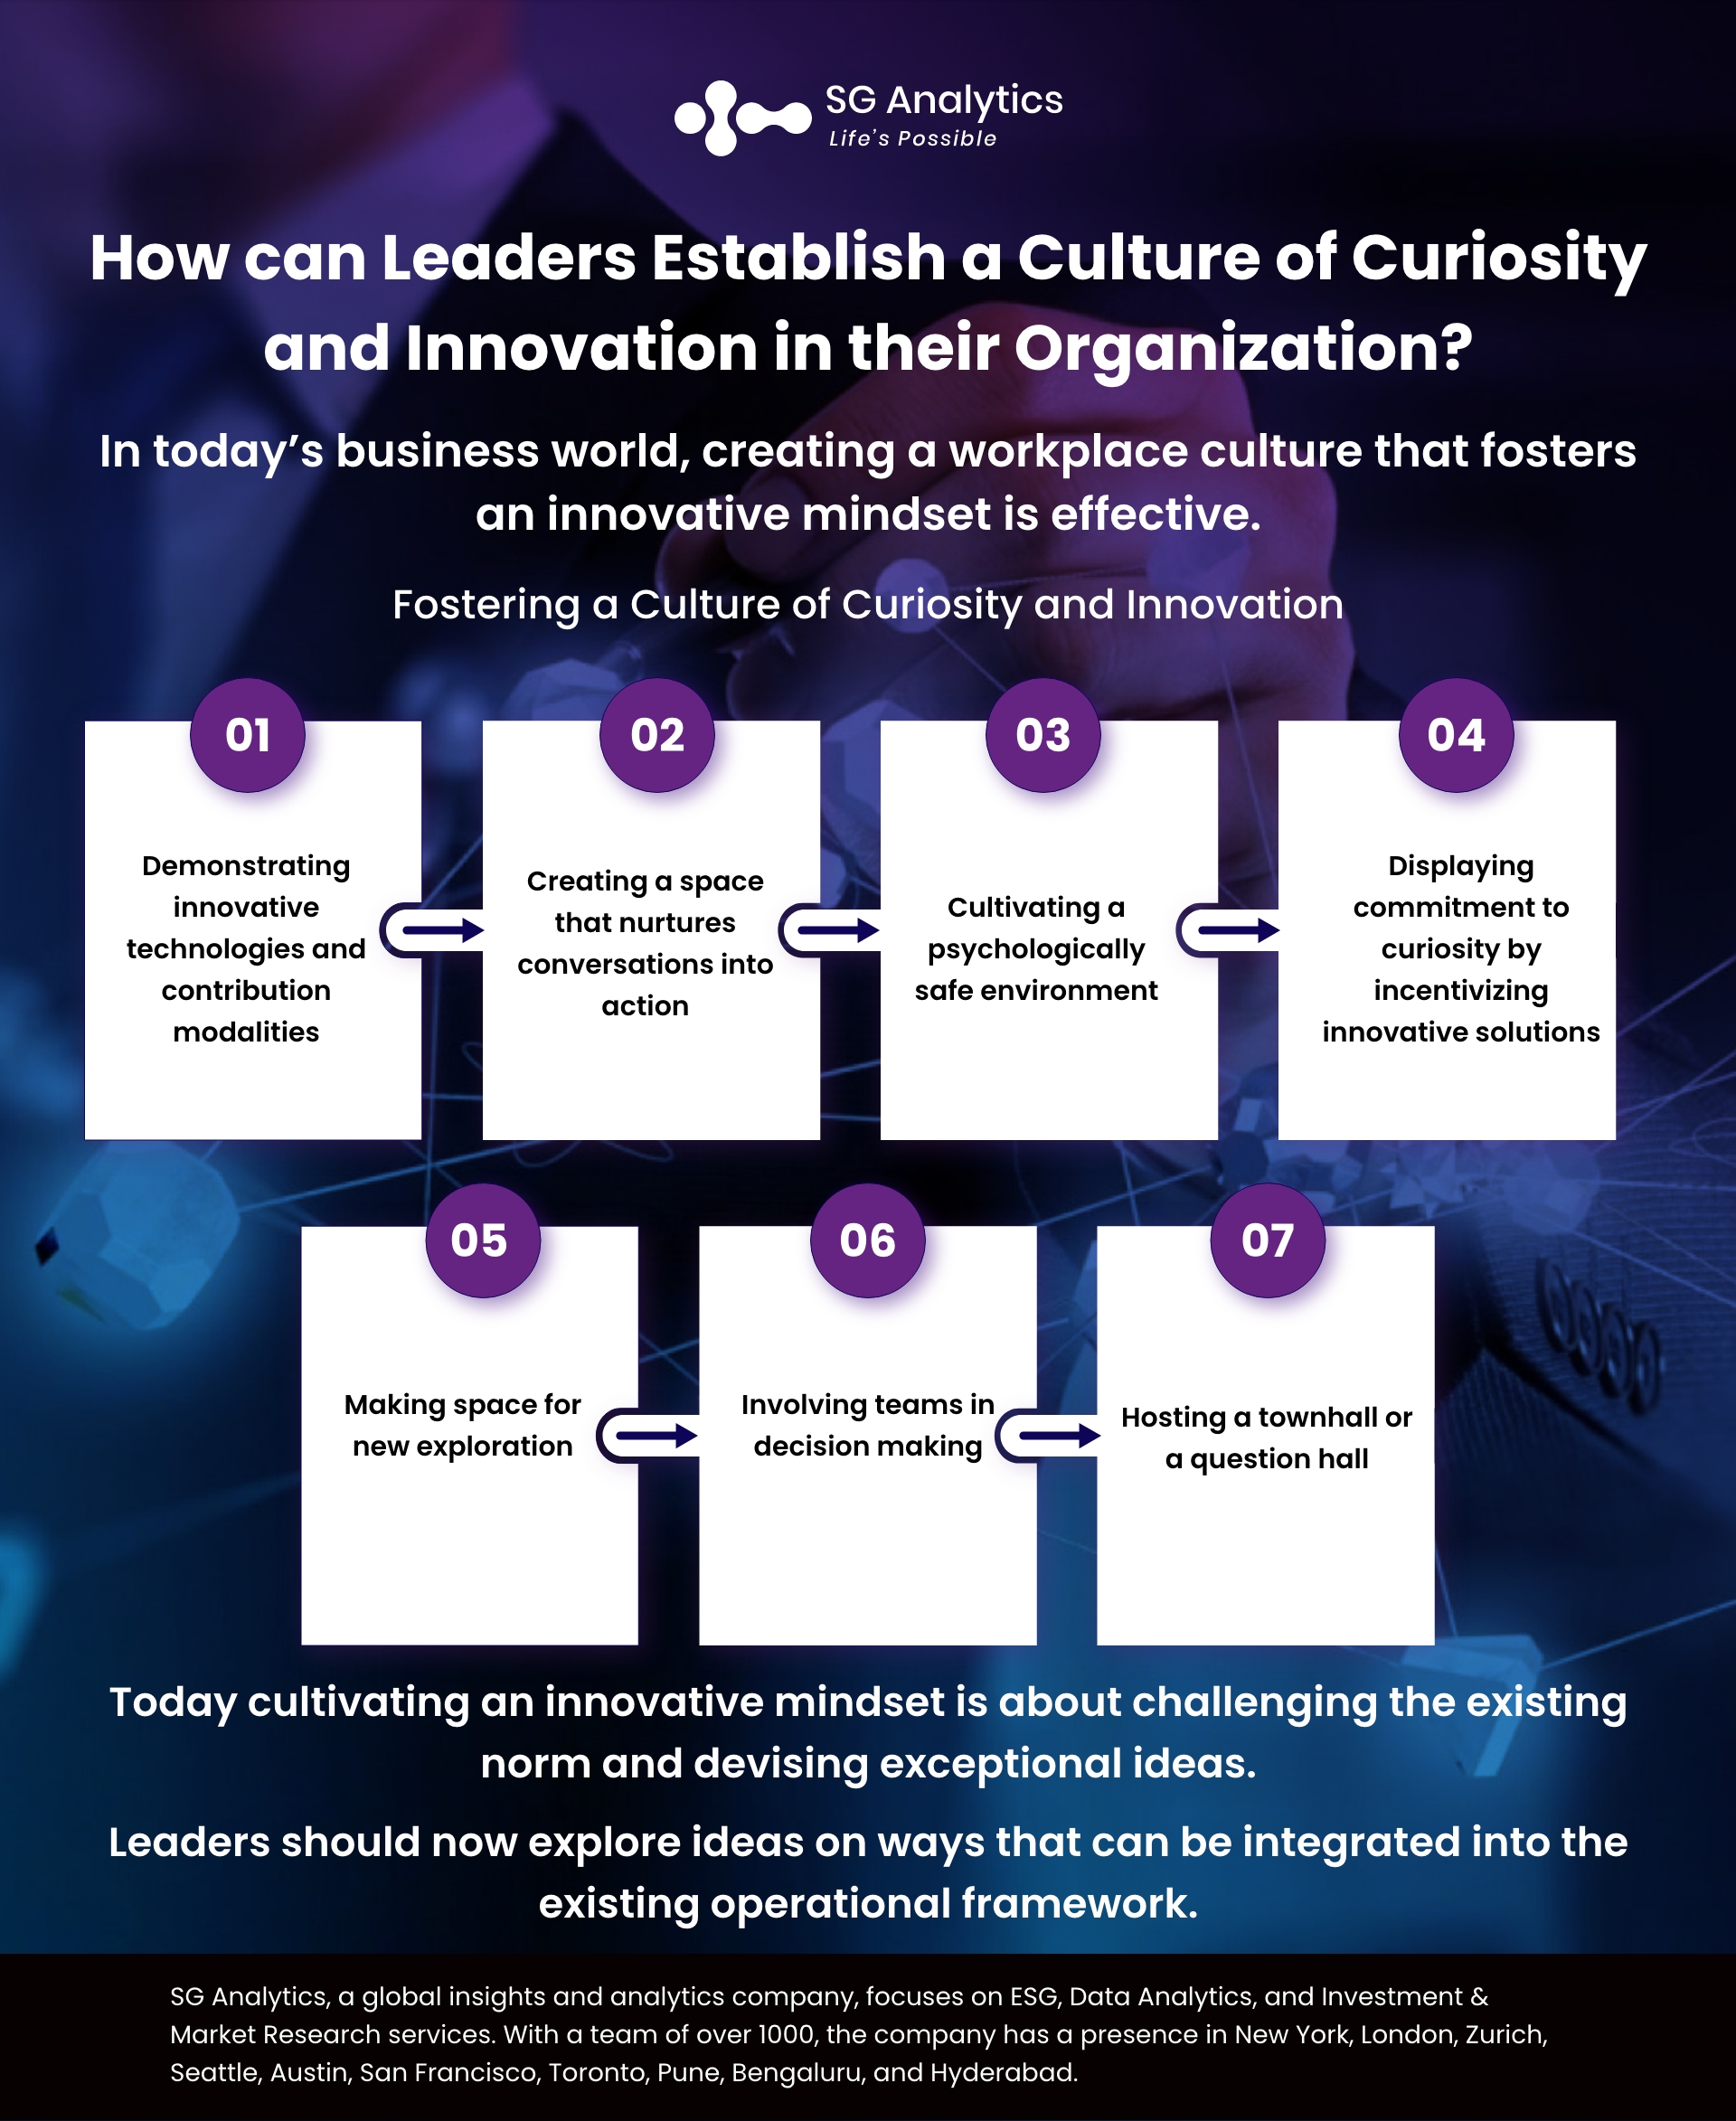 SGAnalytics_Infographic_How can Leaders Establish a Culture of Curiosity and Innovation in their Organization